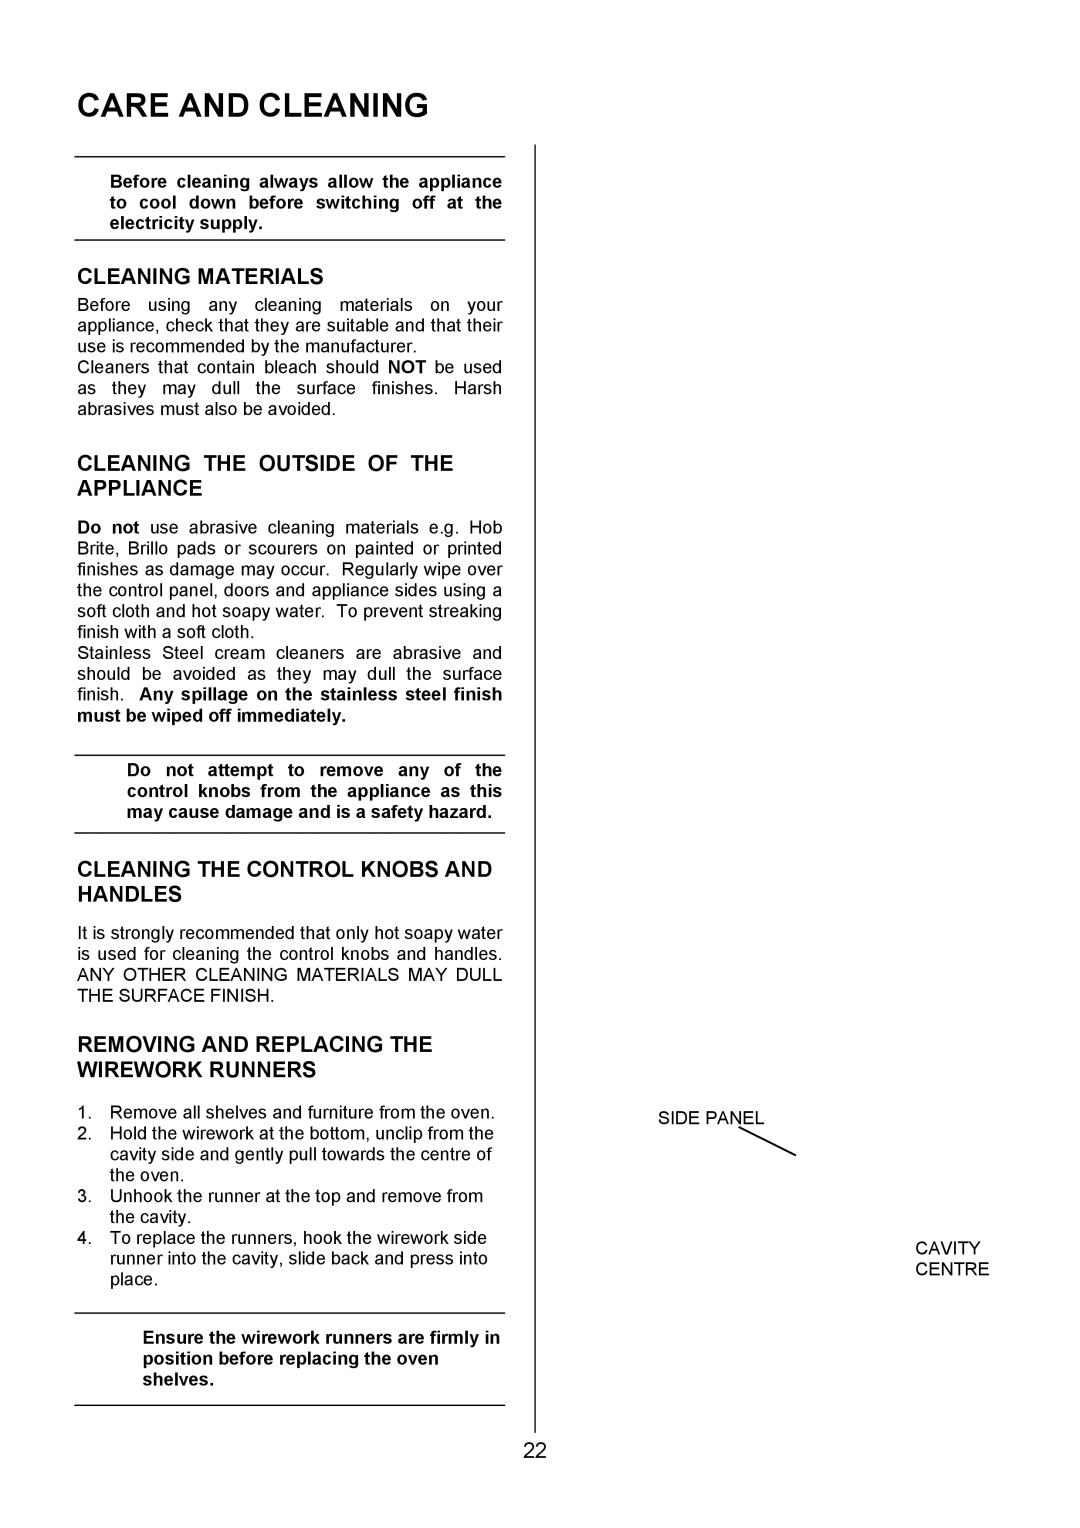 Electrolux EKG5546, EKG5547 user manual Care and Cleaning, Cleaning Materials, Cleaning the Outside of the Appliance 